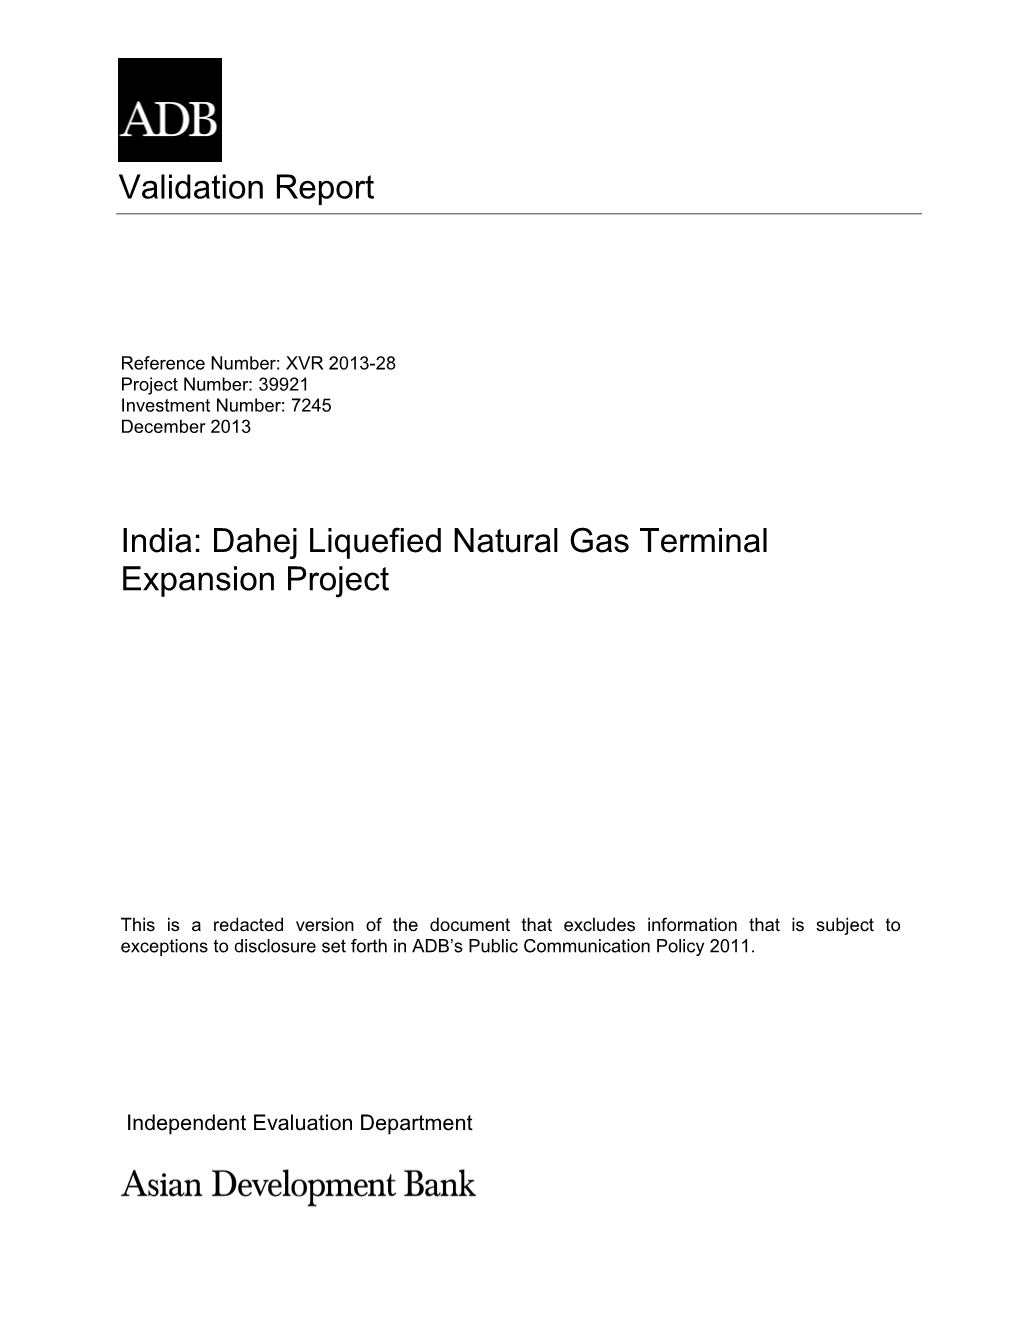 India: Dahej Liquefied Natural Gas Terminal Expansion Project